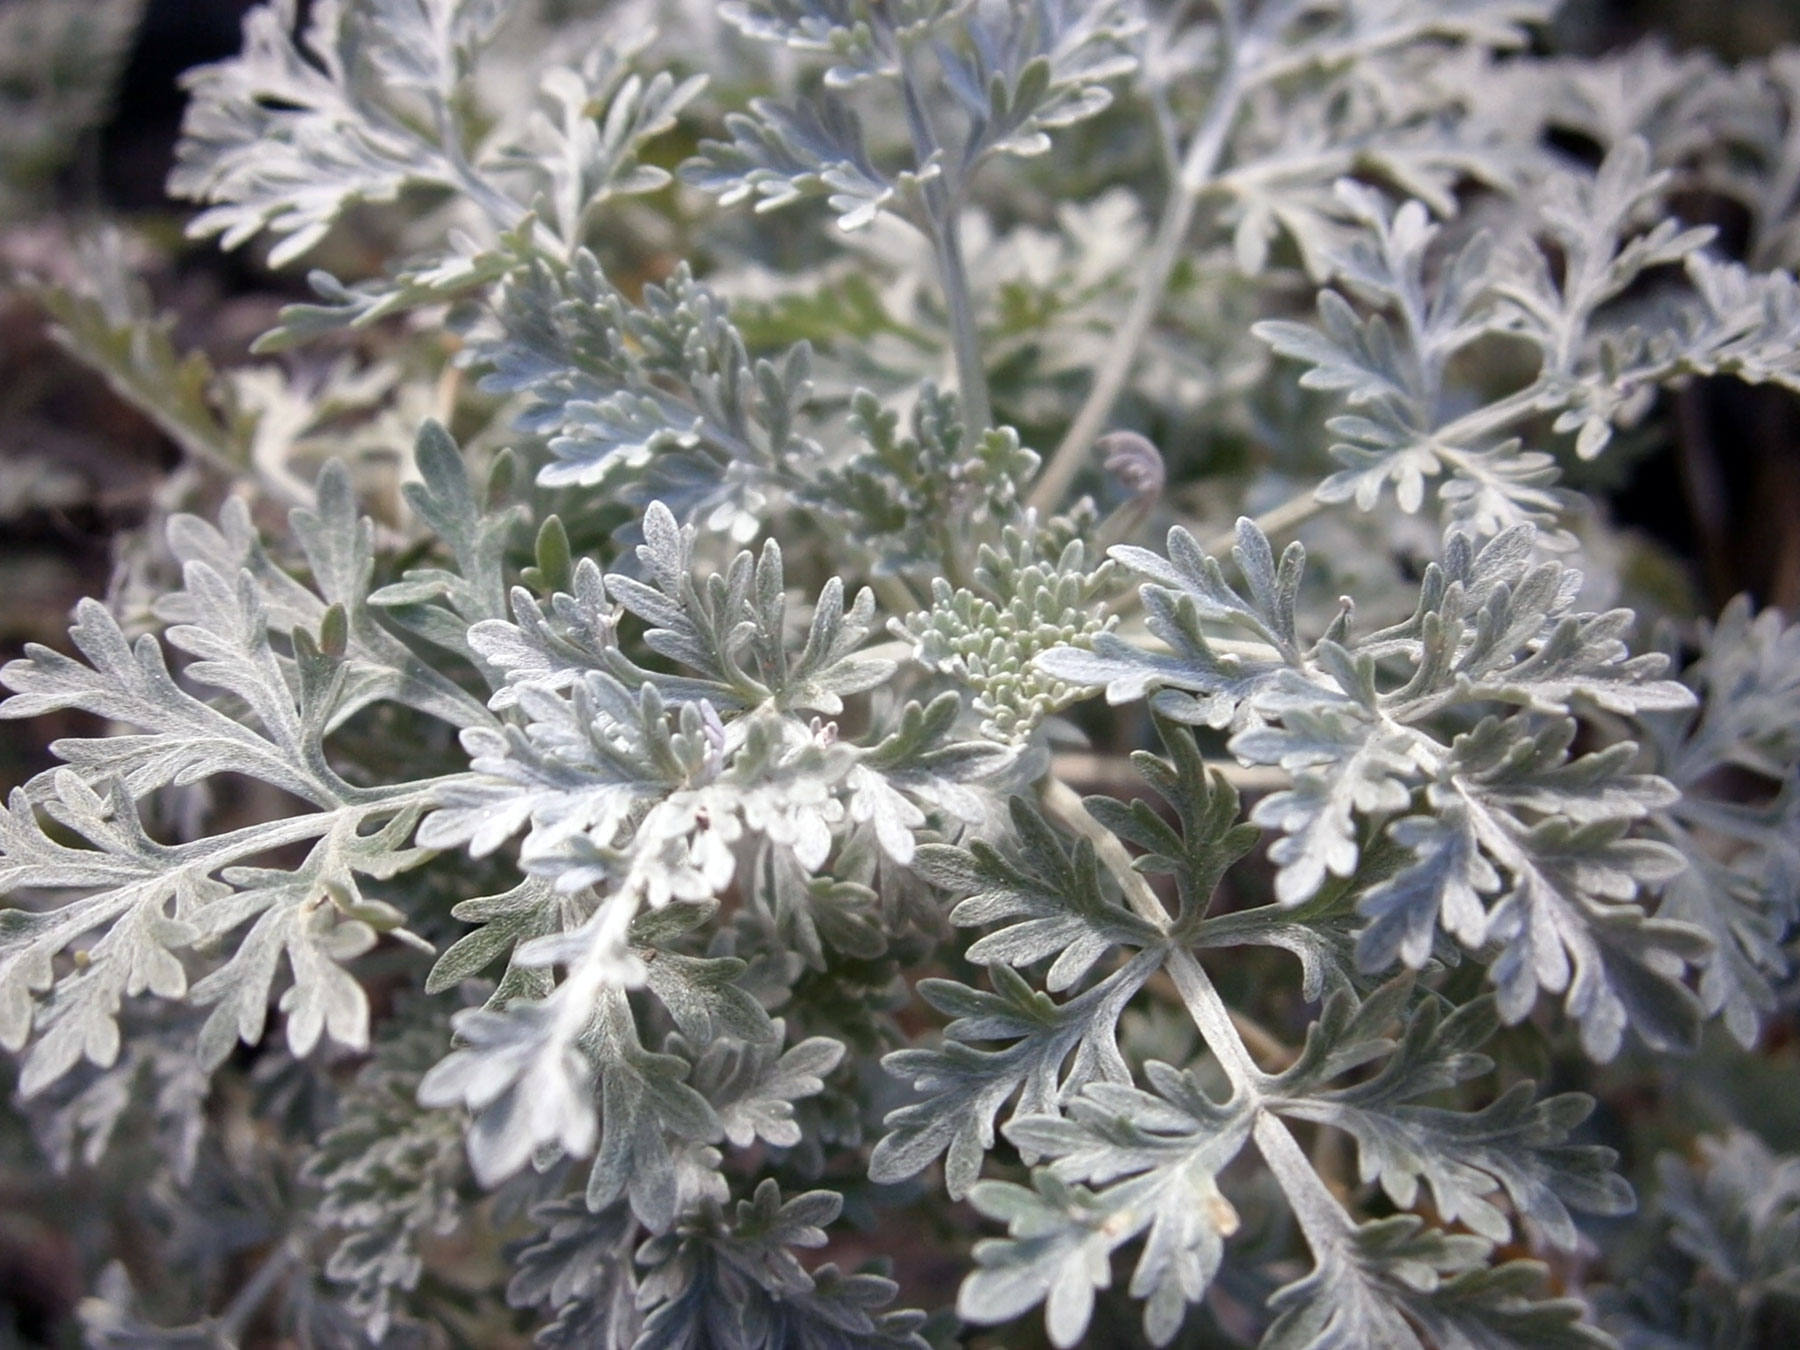 Artemisia The Garden Center February Plant of the Month